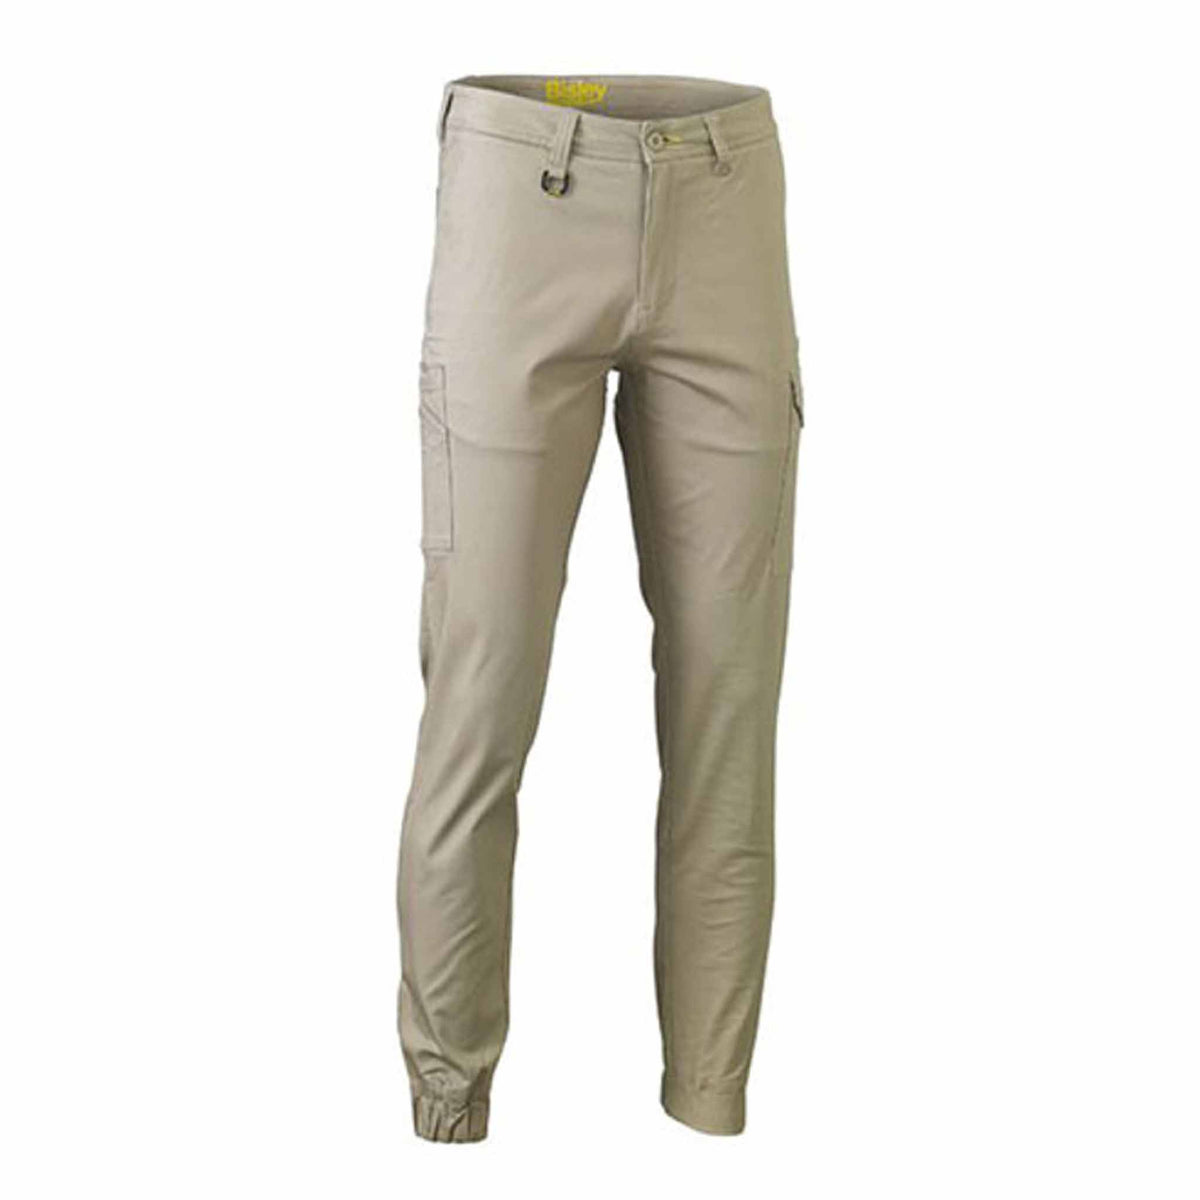 bisley stretch cotton drill cargo cuffed pants in stone